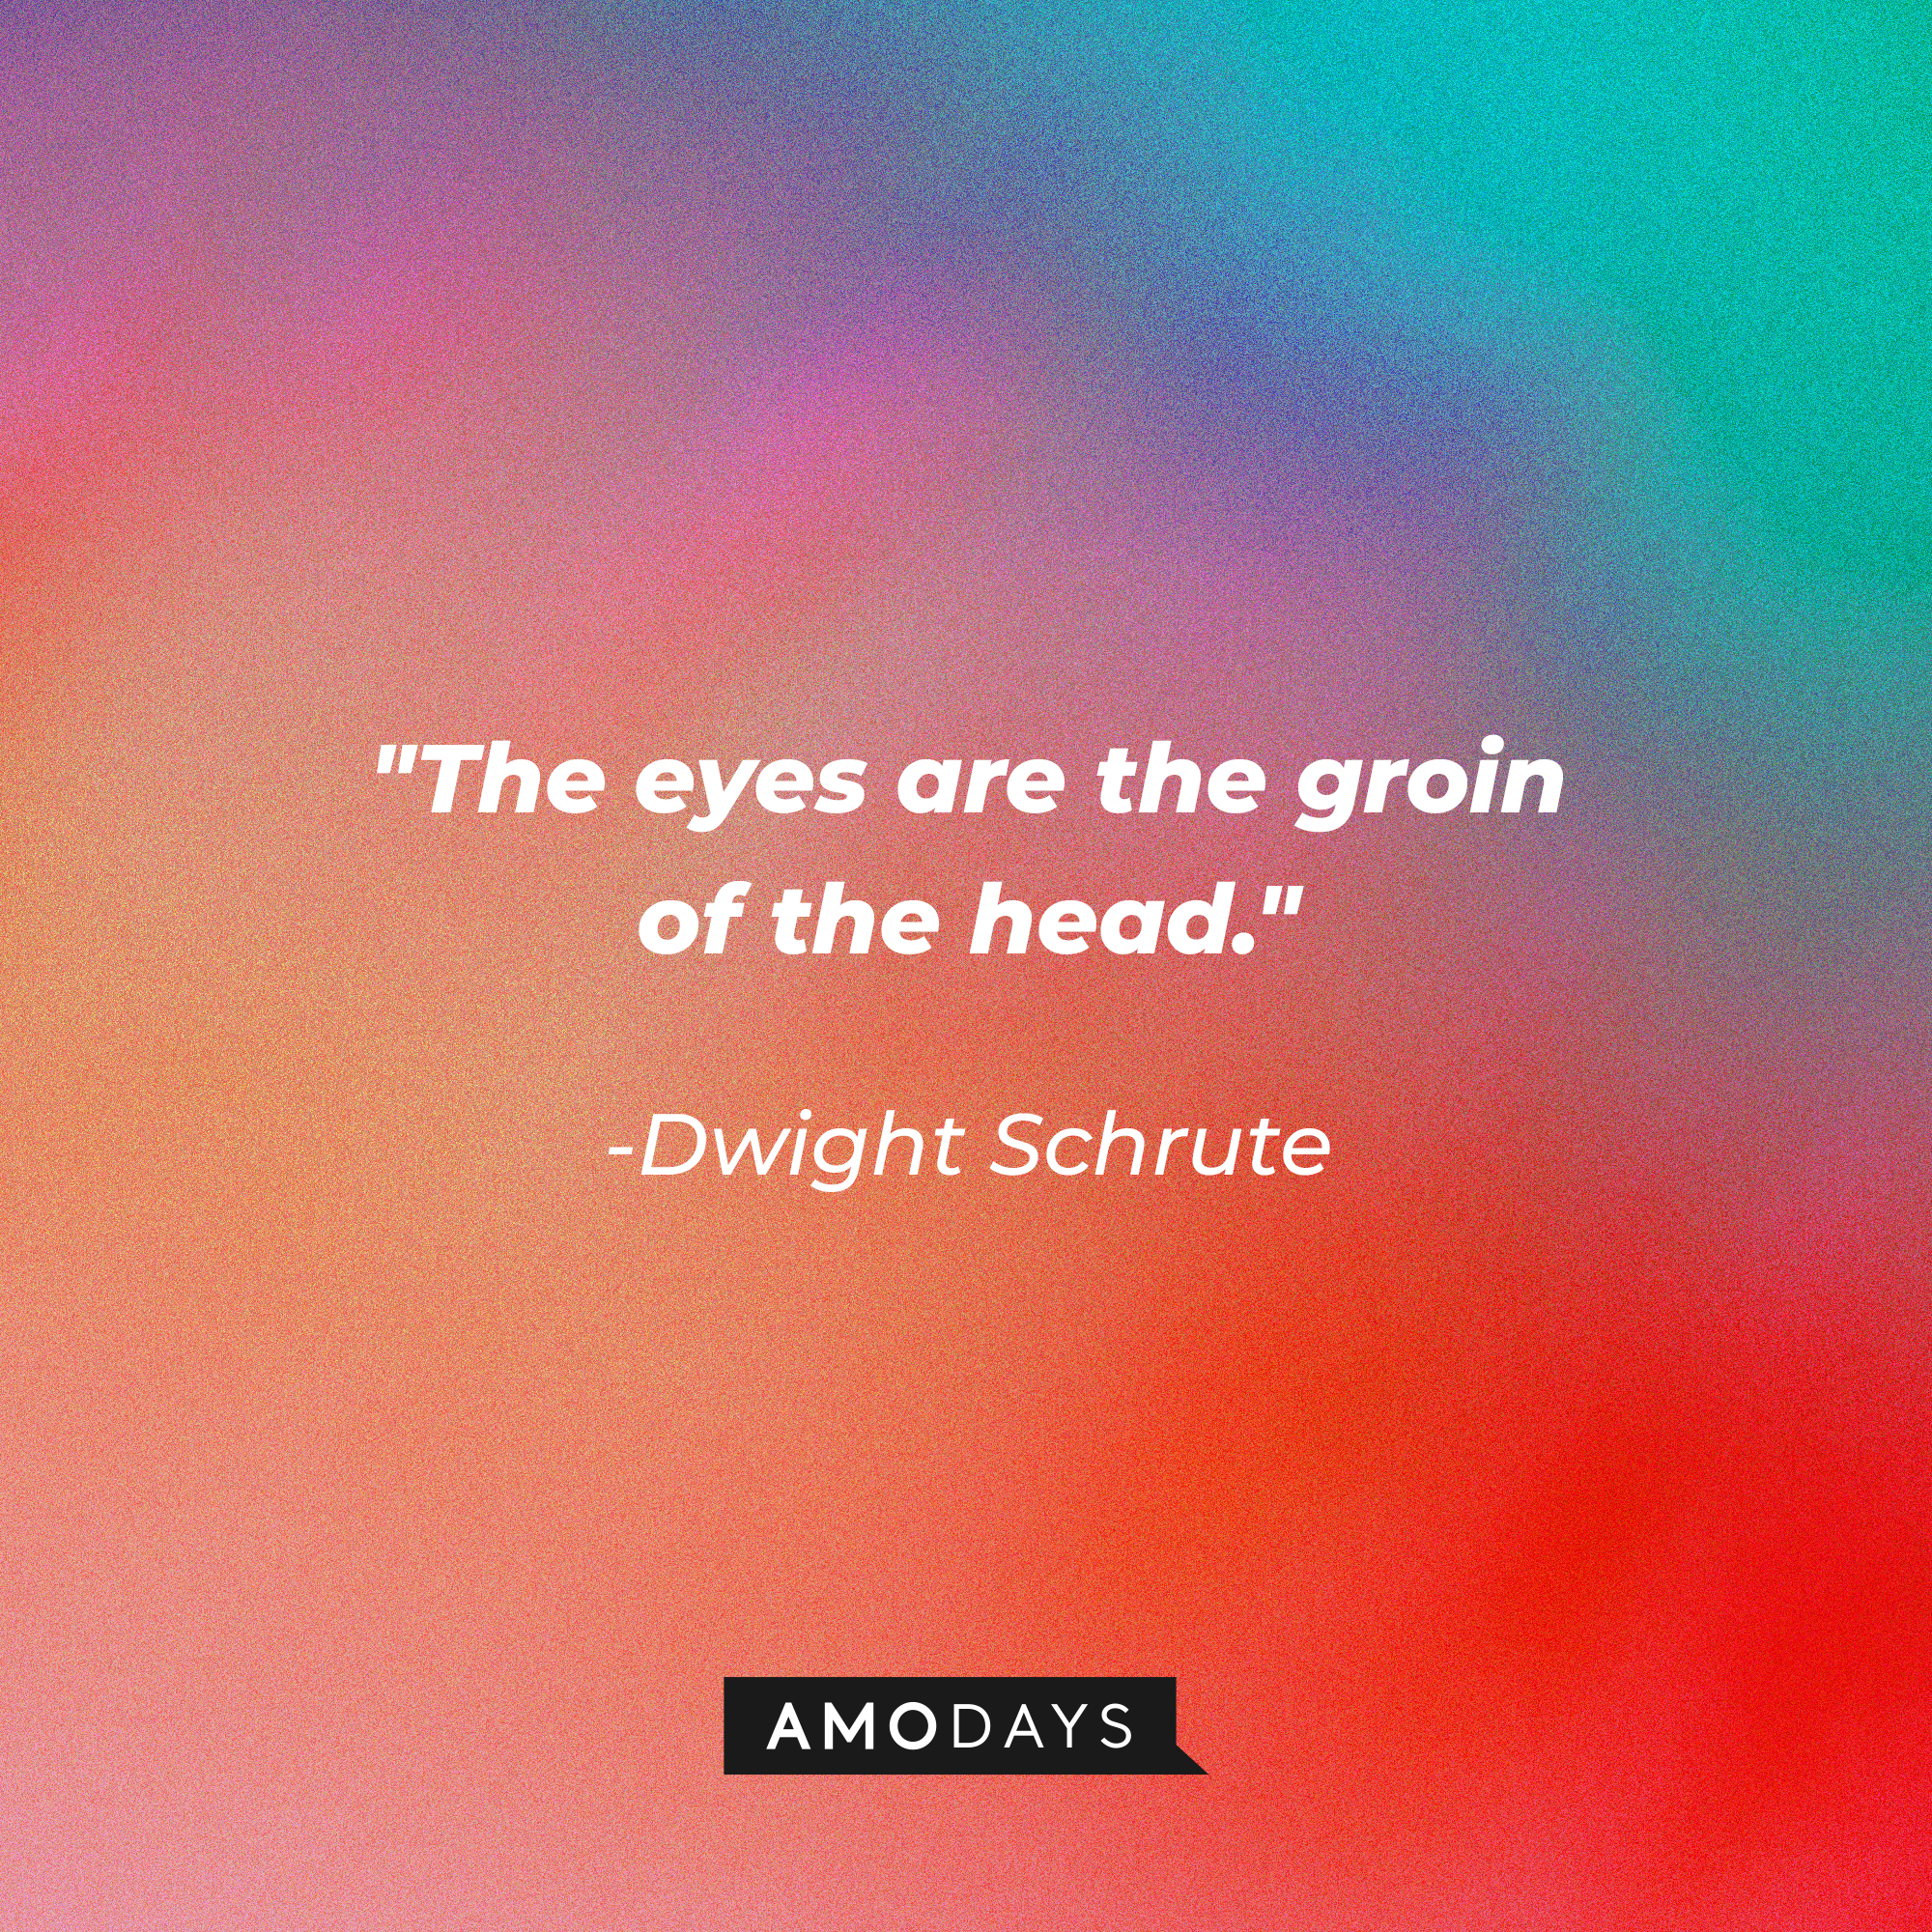 Dwight Schrute’s quote: "The eyes are the groin of the head." | Image: AmoDays